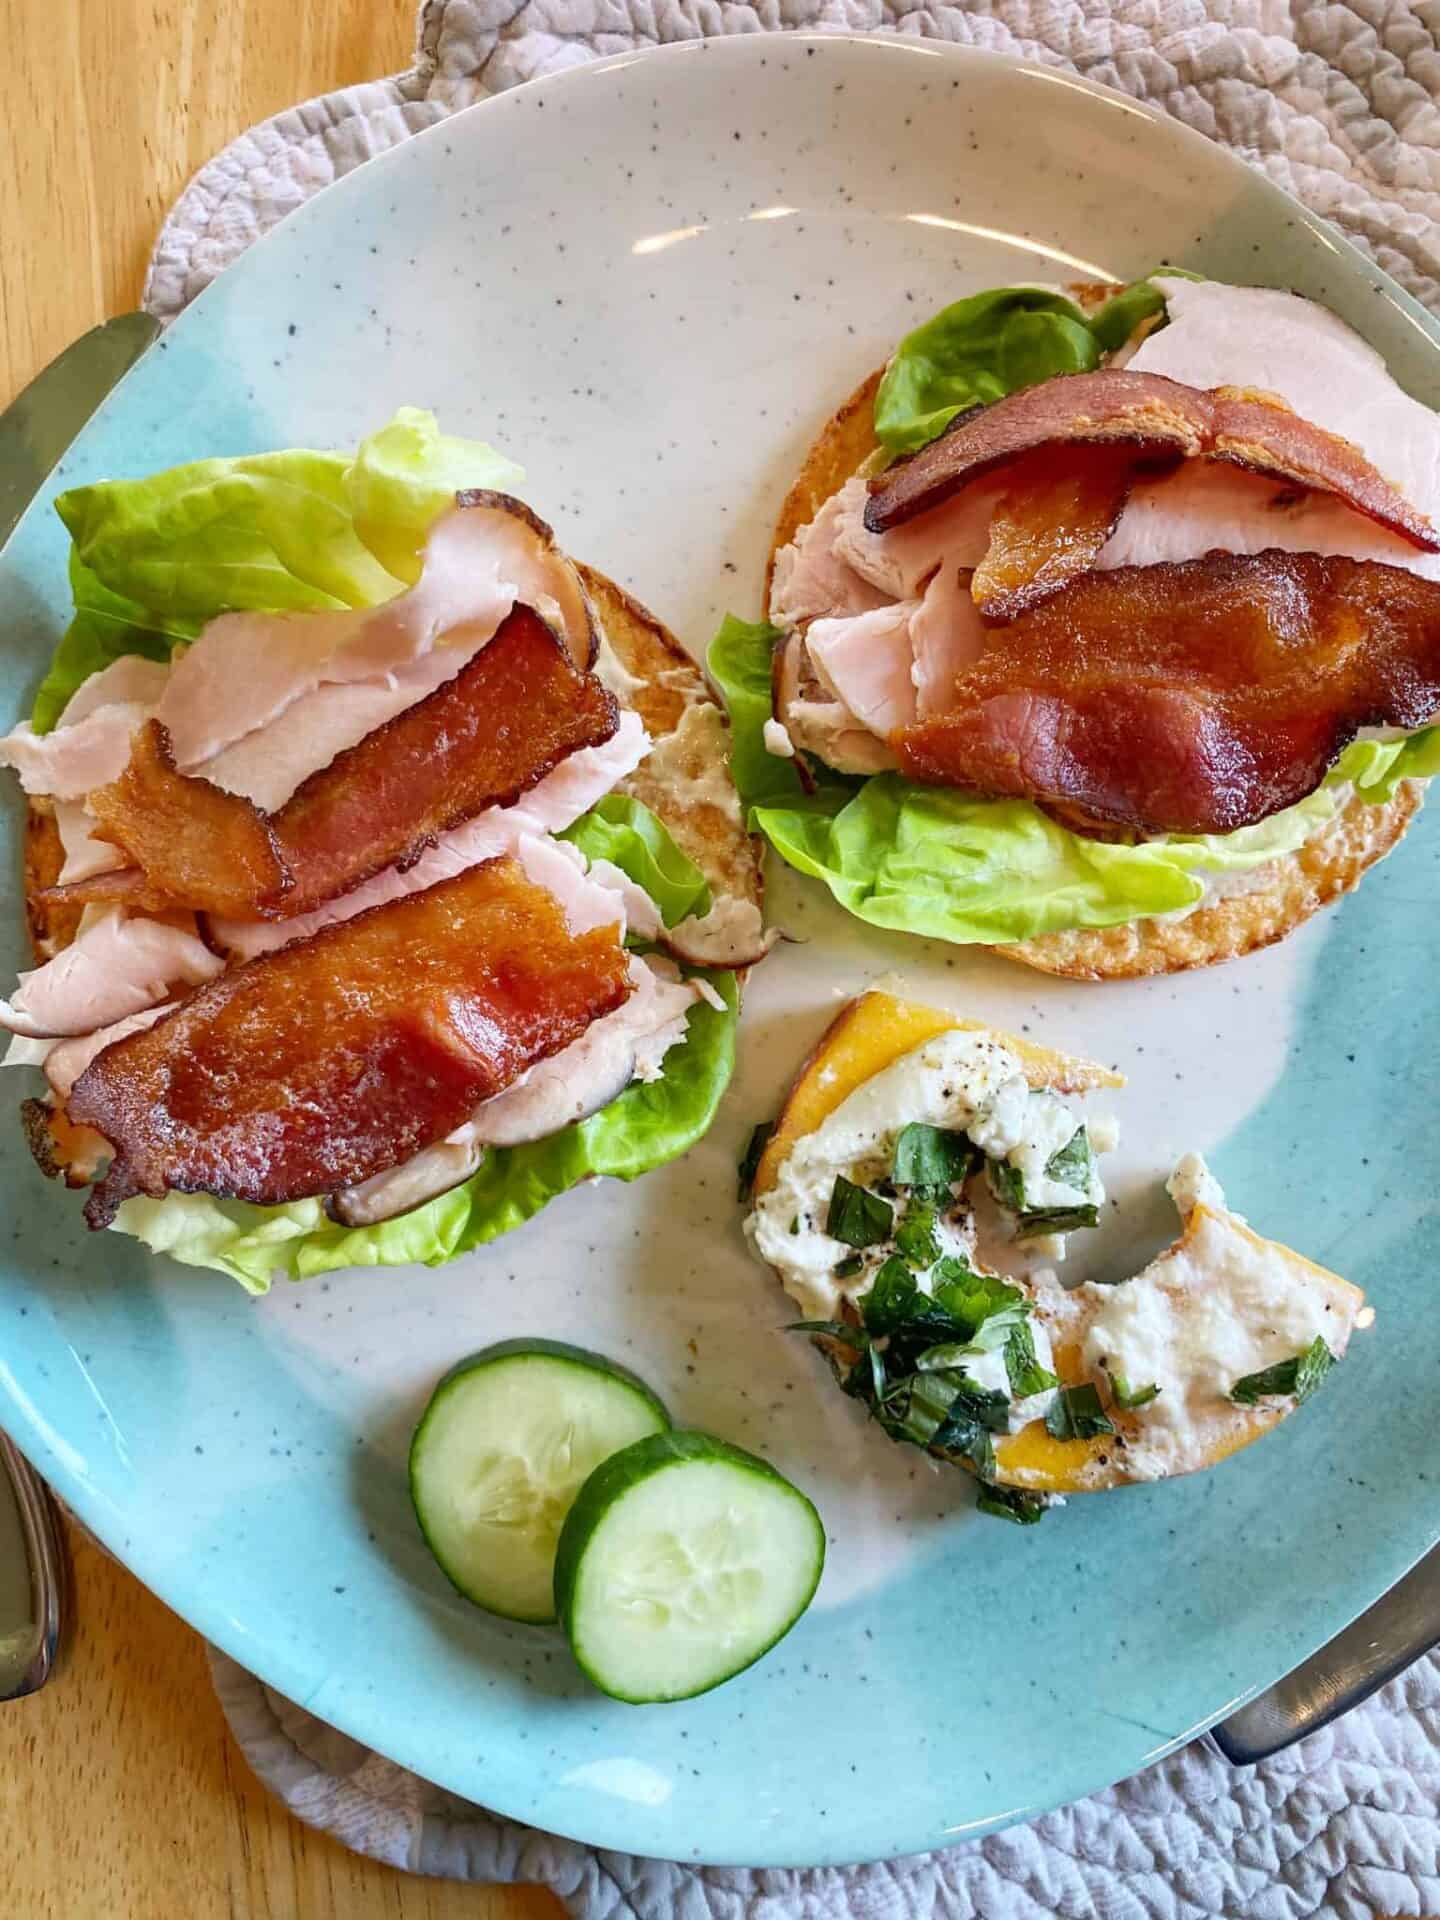 Easy-Healthy-Lunch-Ideas-Trader-Joes-Cauliflower-Thins-with-Turkey-Bacon-Lettuce-Mayo-and-Dijon